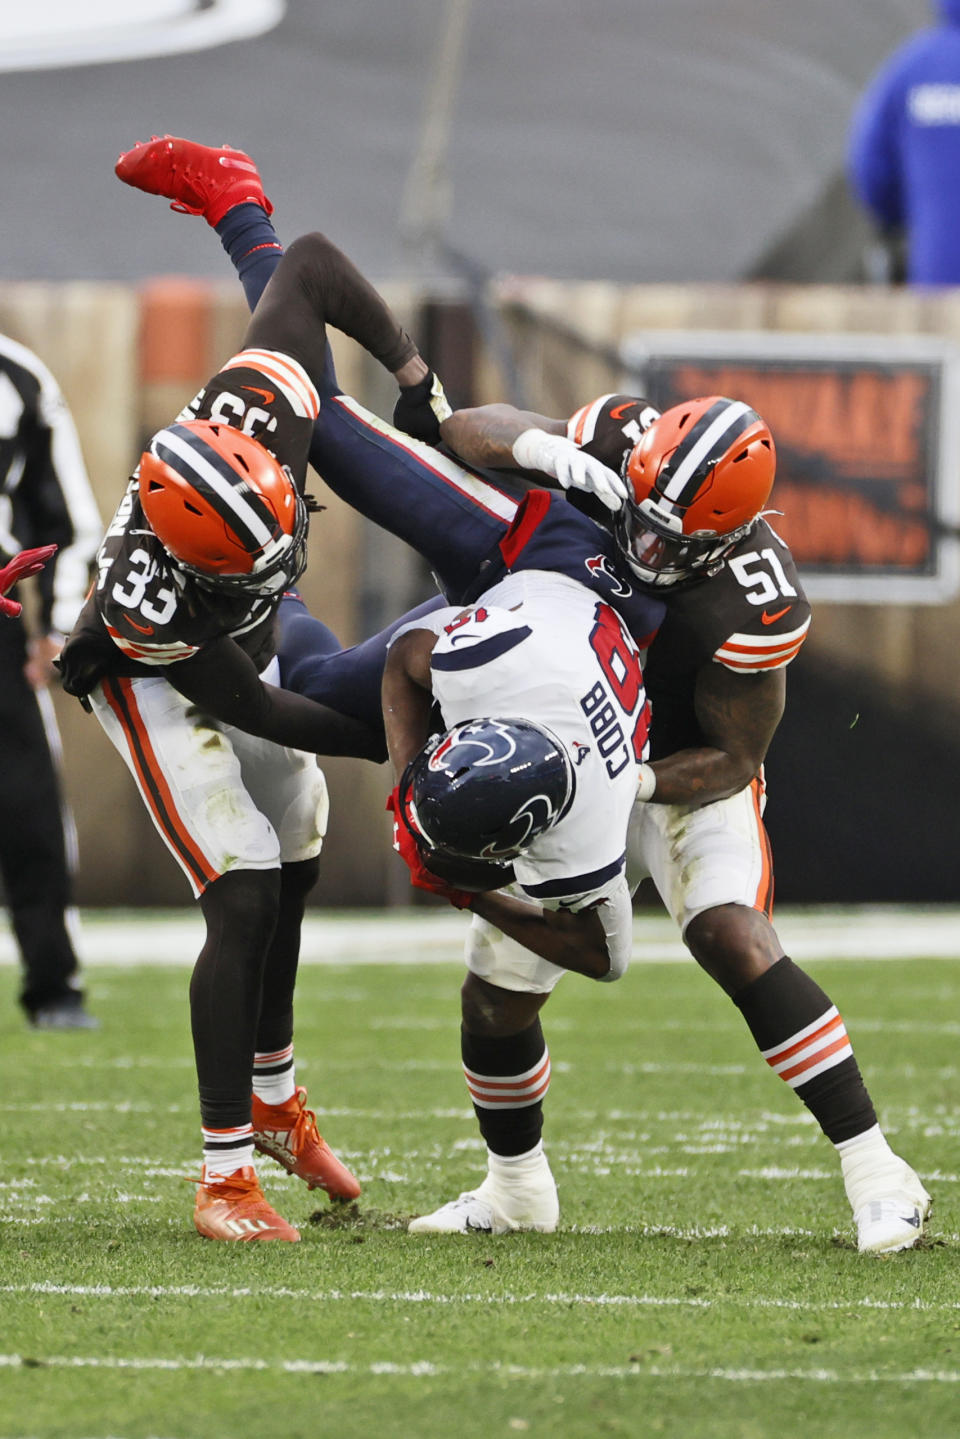 Cleveland Browns defensive back Ronnie Harrison (33) and linebacker Mack Wilson (51) tackle Houston Texans wide receiver Randall Cobb (18) during the second half of an NFL football game, Sunday, Nov. 15, 2020, in Cleveland. (AP Photo/Ron Schwane)